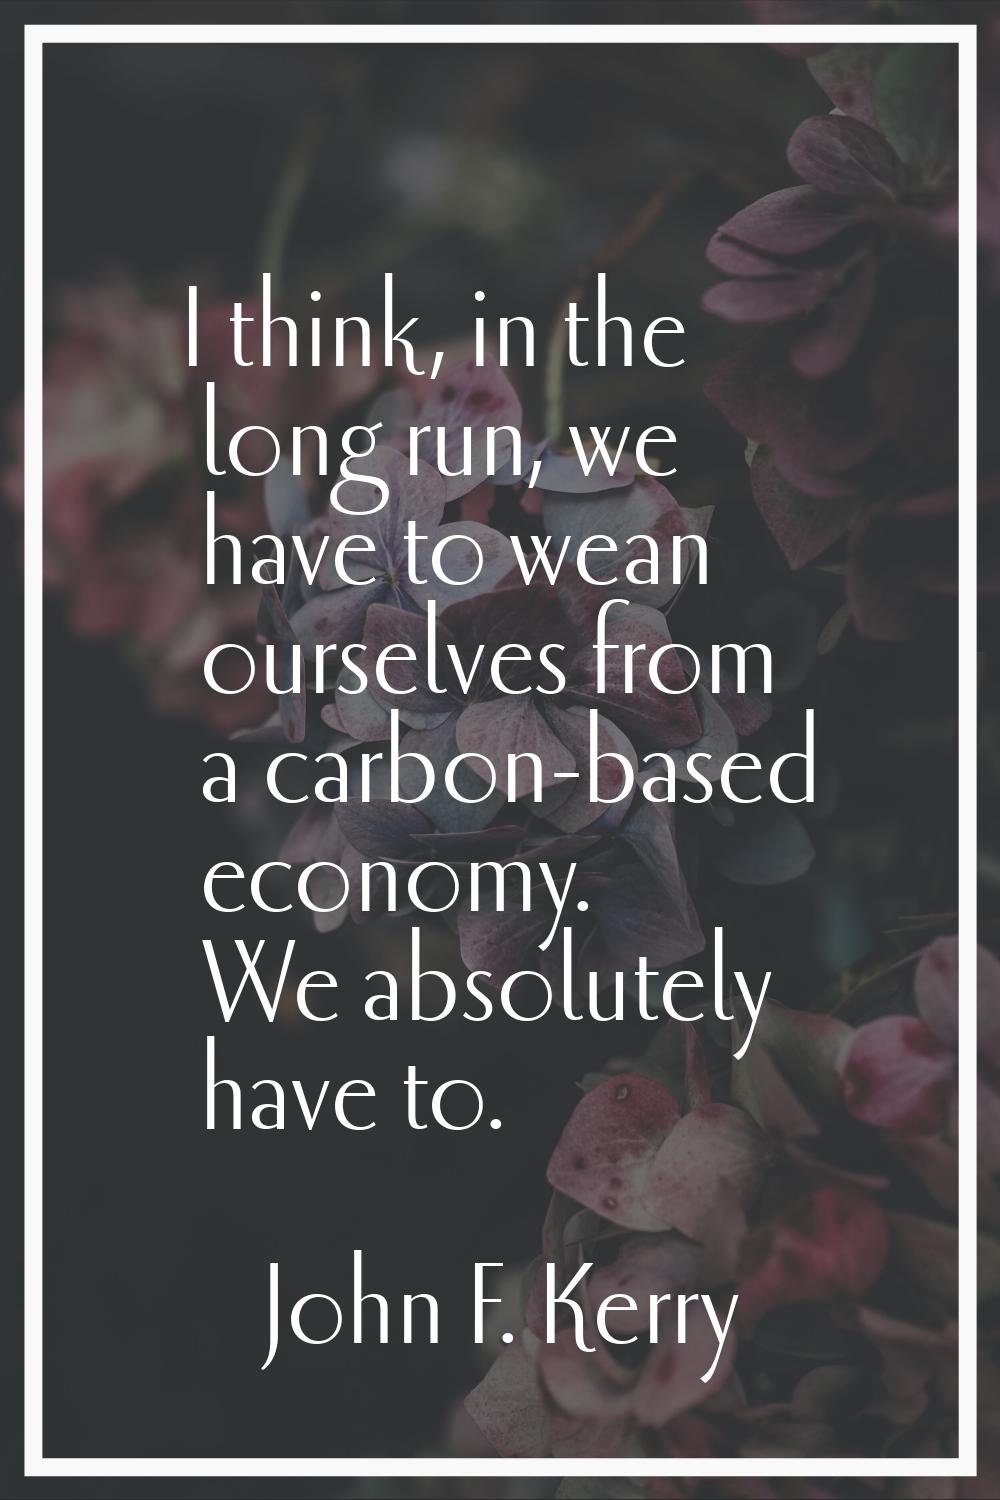 I think, in the long run, we have to wean ourselves from a carbon-based economy. We absolutely have